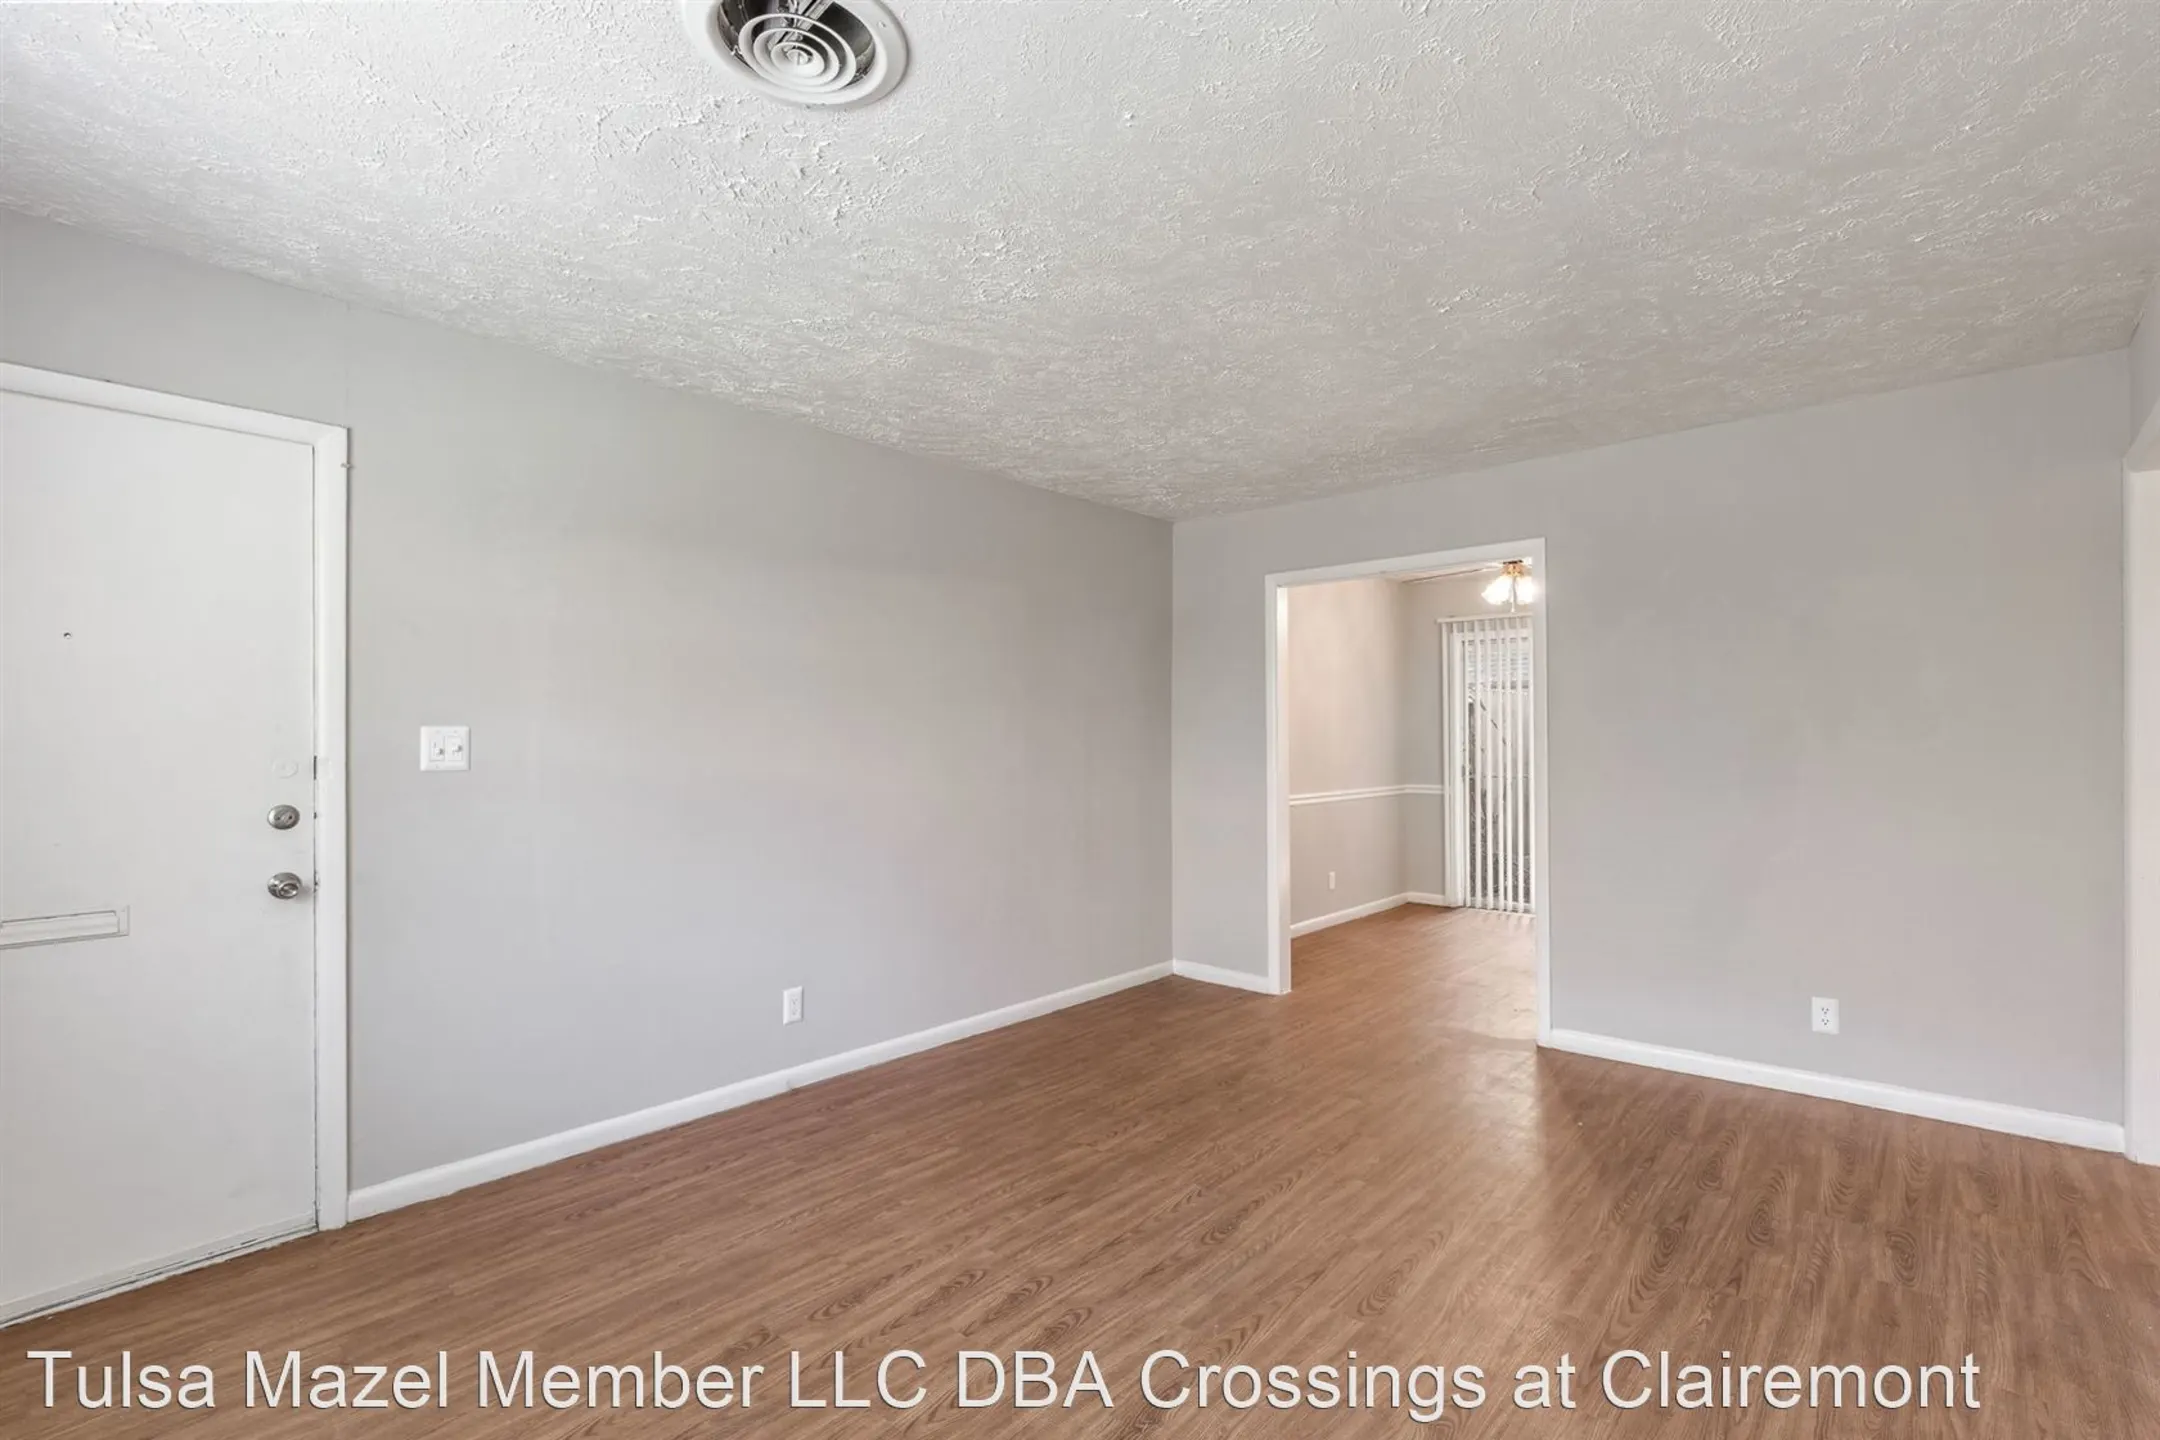 Living Room - Crossings at Clairemont - Tulsa, OK